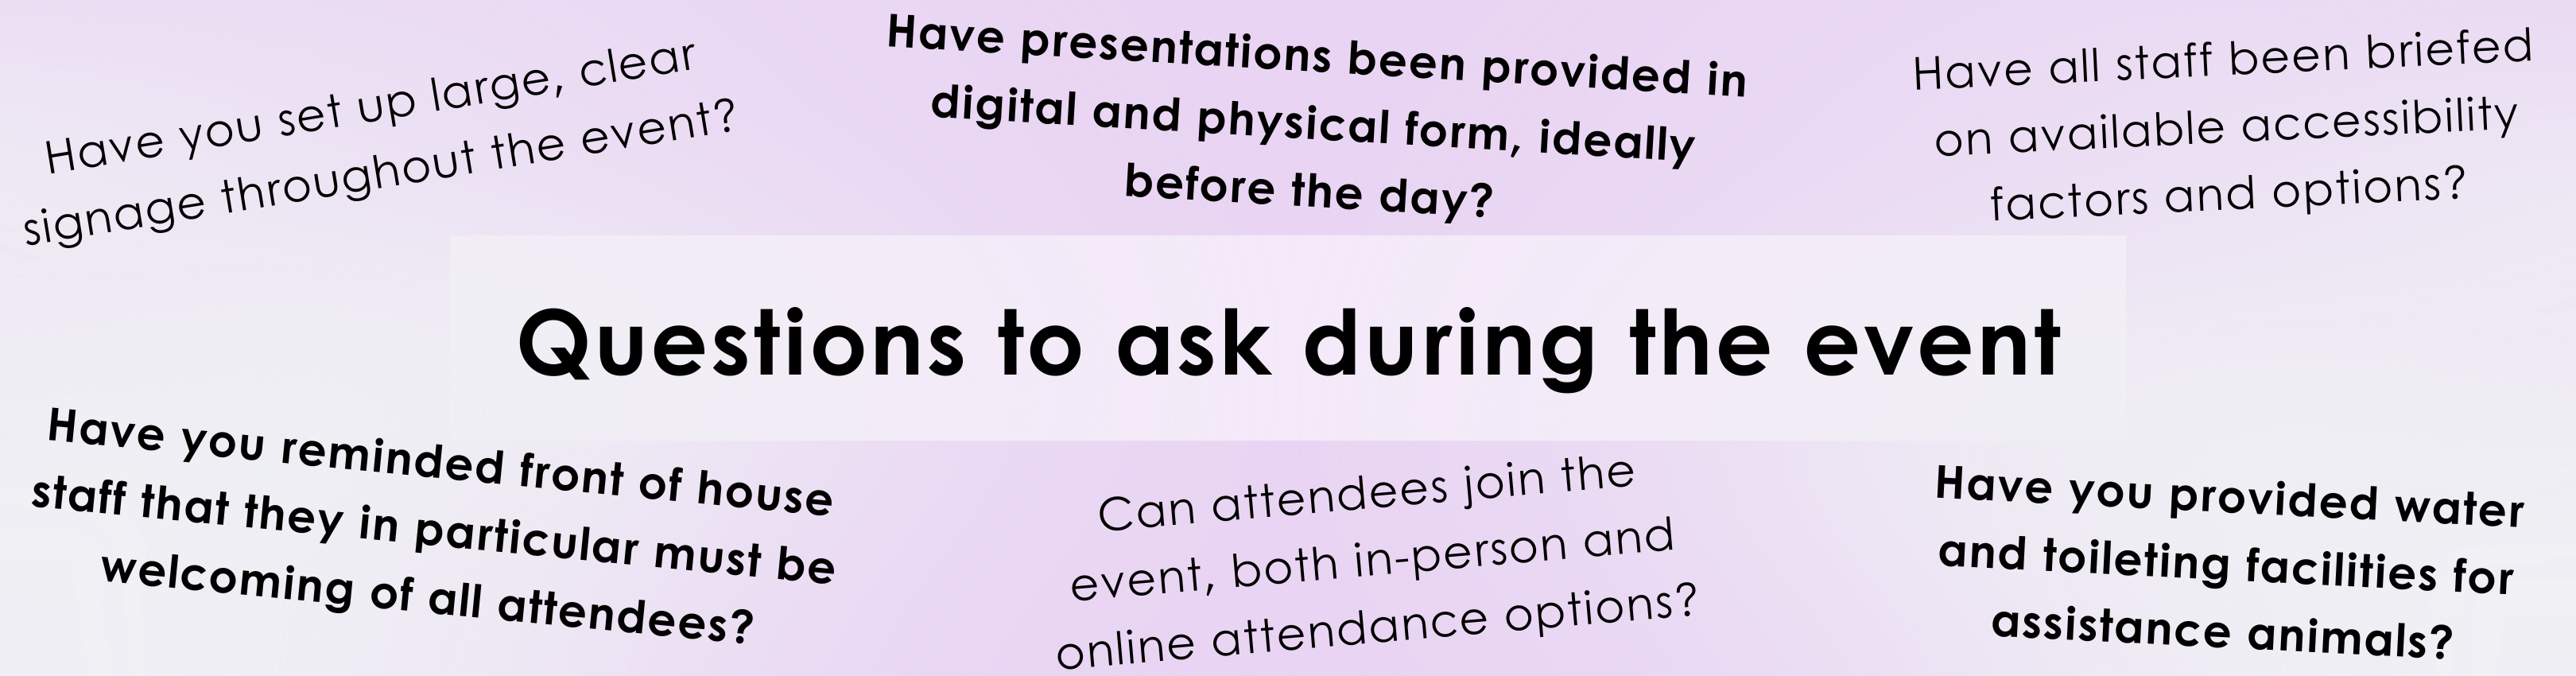 A light purple background with gradient white bottom corners. A transparent white box with text "questions to ask during the event", with 6 questions listed surrounding the heading, 3 in bold text and 3 in normal style font.